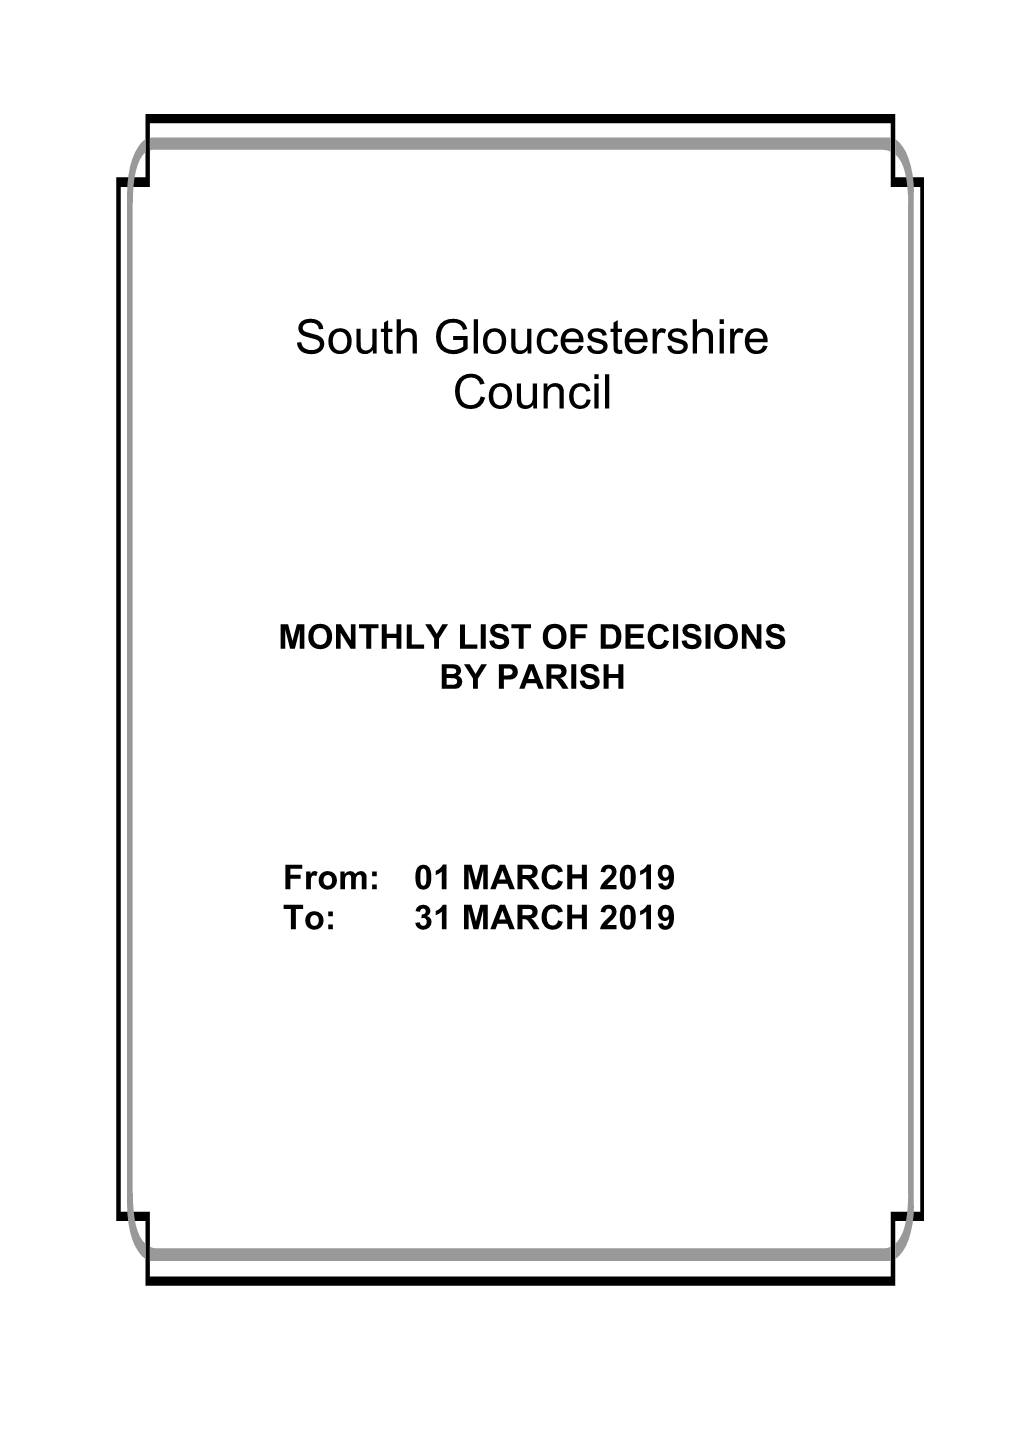 MONTHLY LIST of DECISIONS by PARISH From: 01 MARCH 2019 To